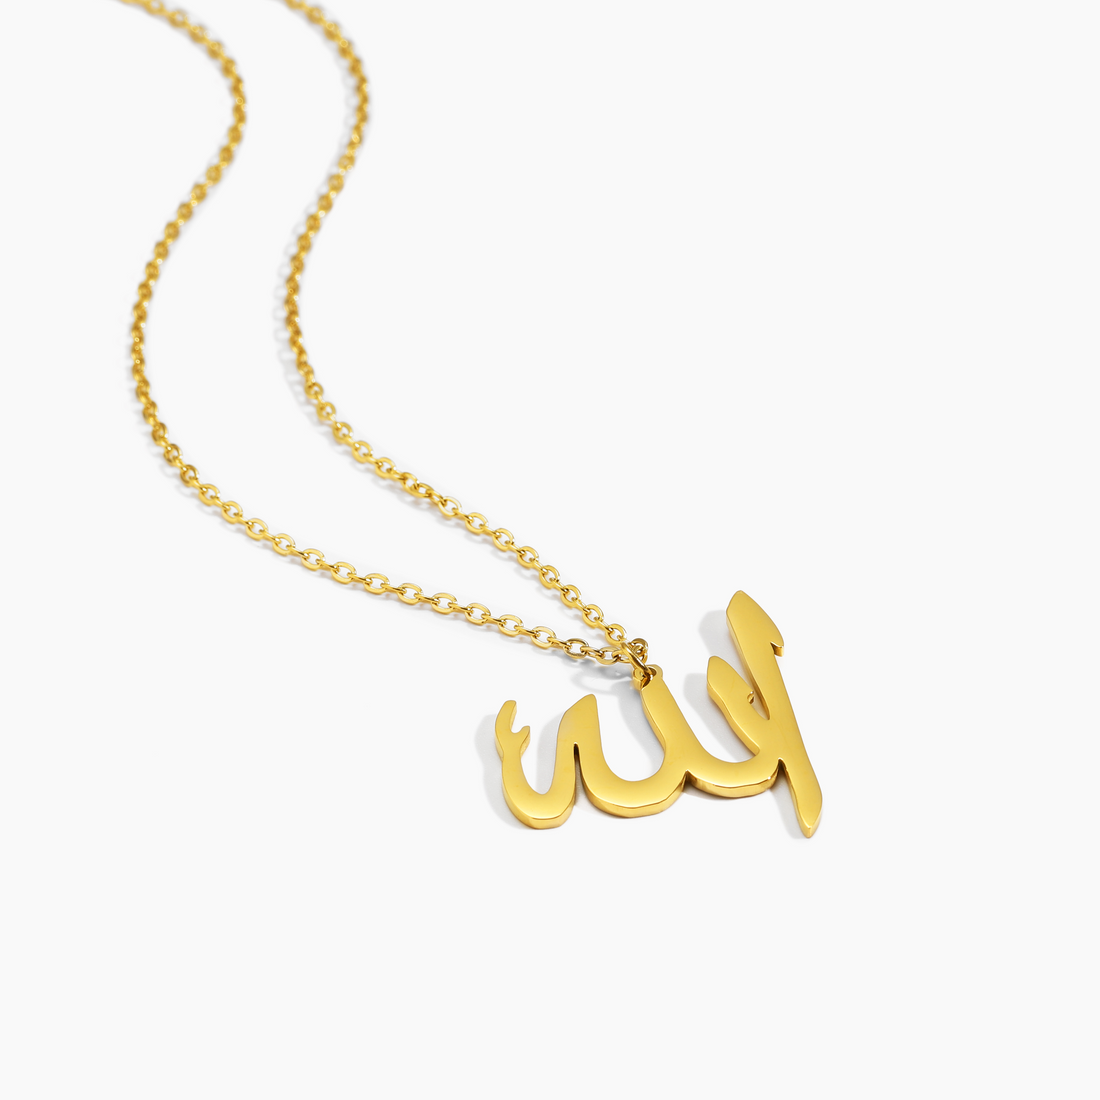 Allah Necklace + Free Gift Pouch